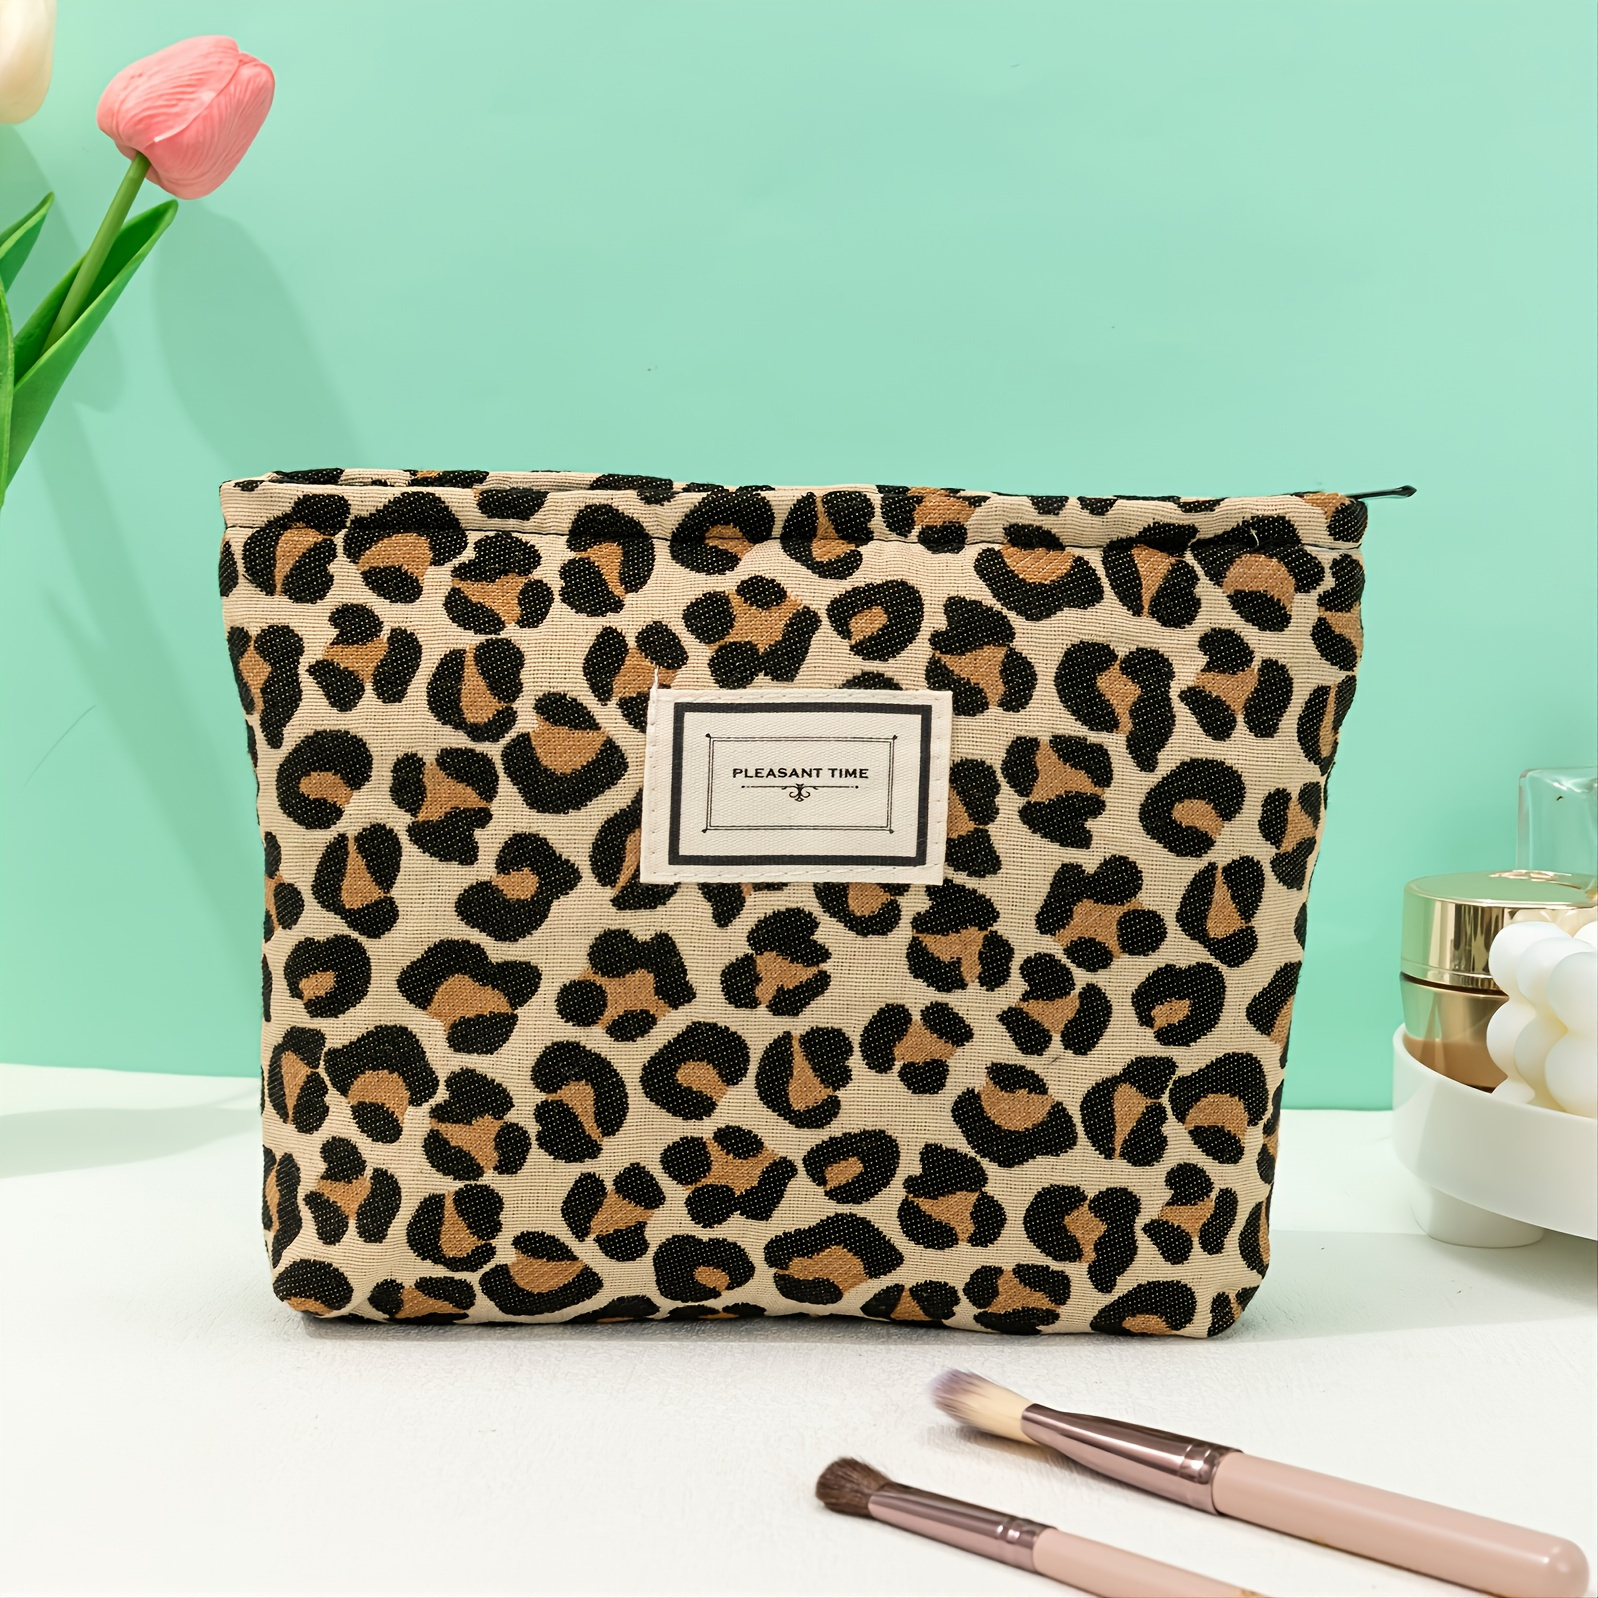 

Leopard Print Cosmetic Bags For Women Makeup Bag Large Capacity Purse Travel Toiletry Zipper Storage Pouch Make Up Brushes Organizer For Girls Gifts (yellow, Leopard)